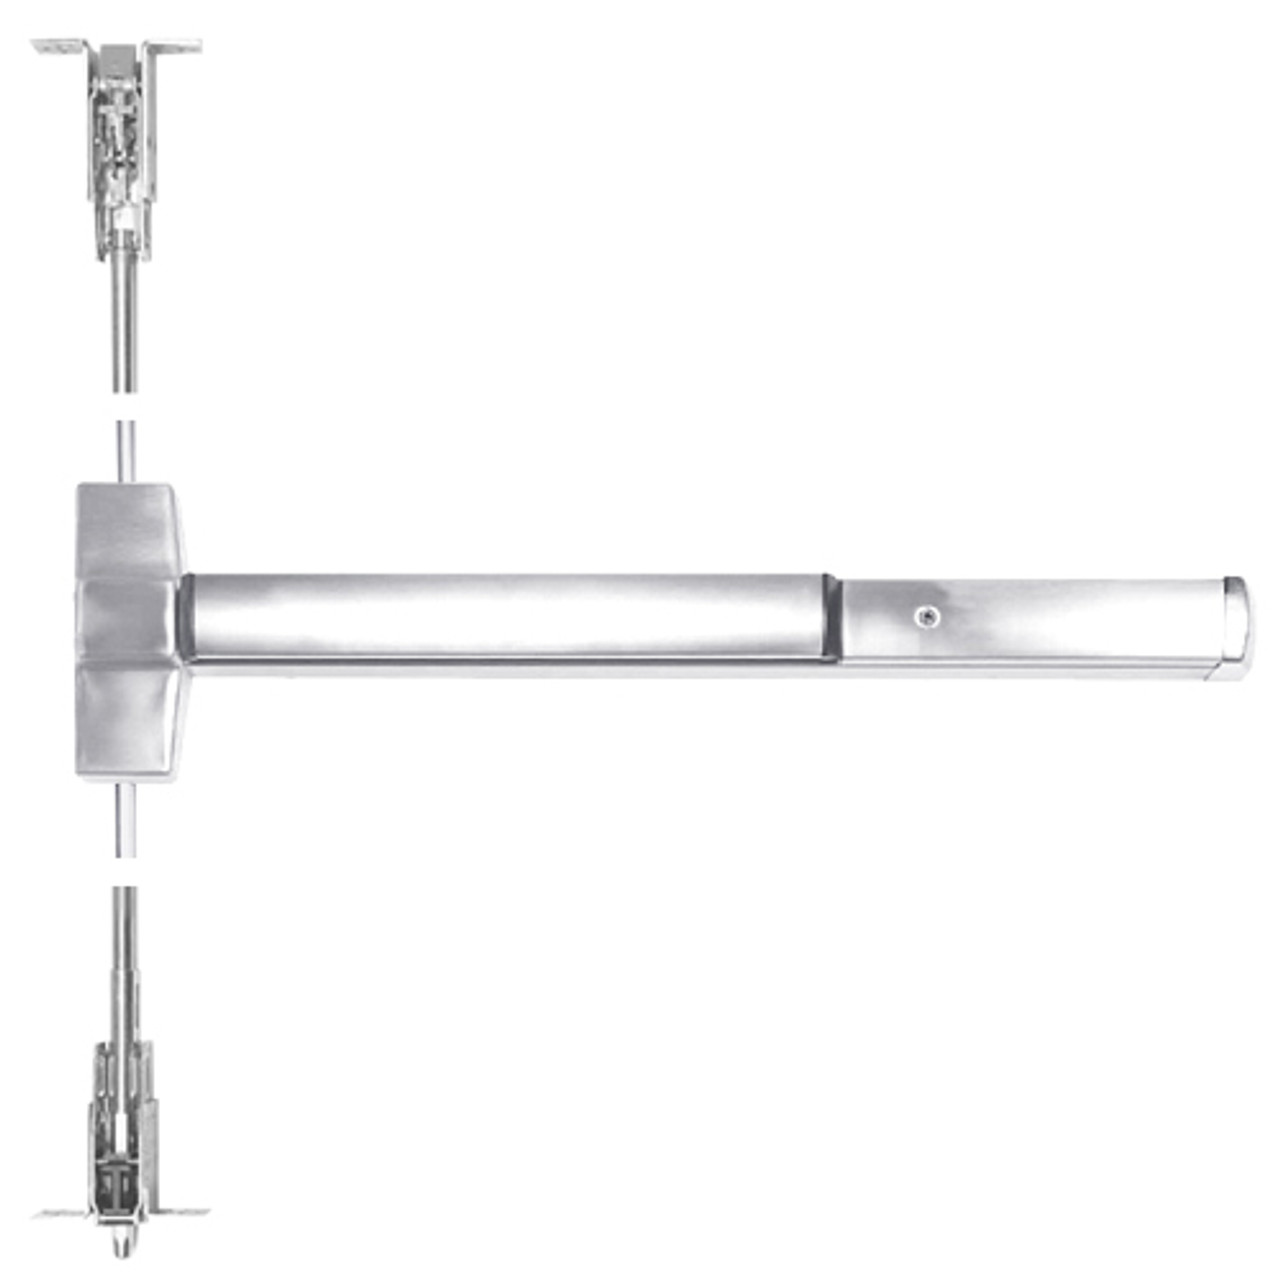 ED5800-625-W048-MELR-M92 Corbin ED5800 Series Non Fire Rated Concealed Vertical Rod Device with Motor Latch Retraction and Touchbar Monitoring in Bright Chrome Finish